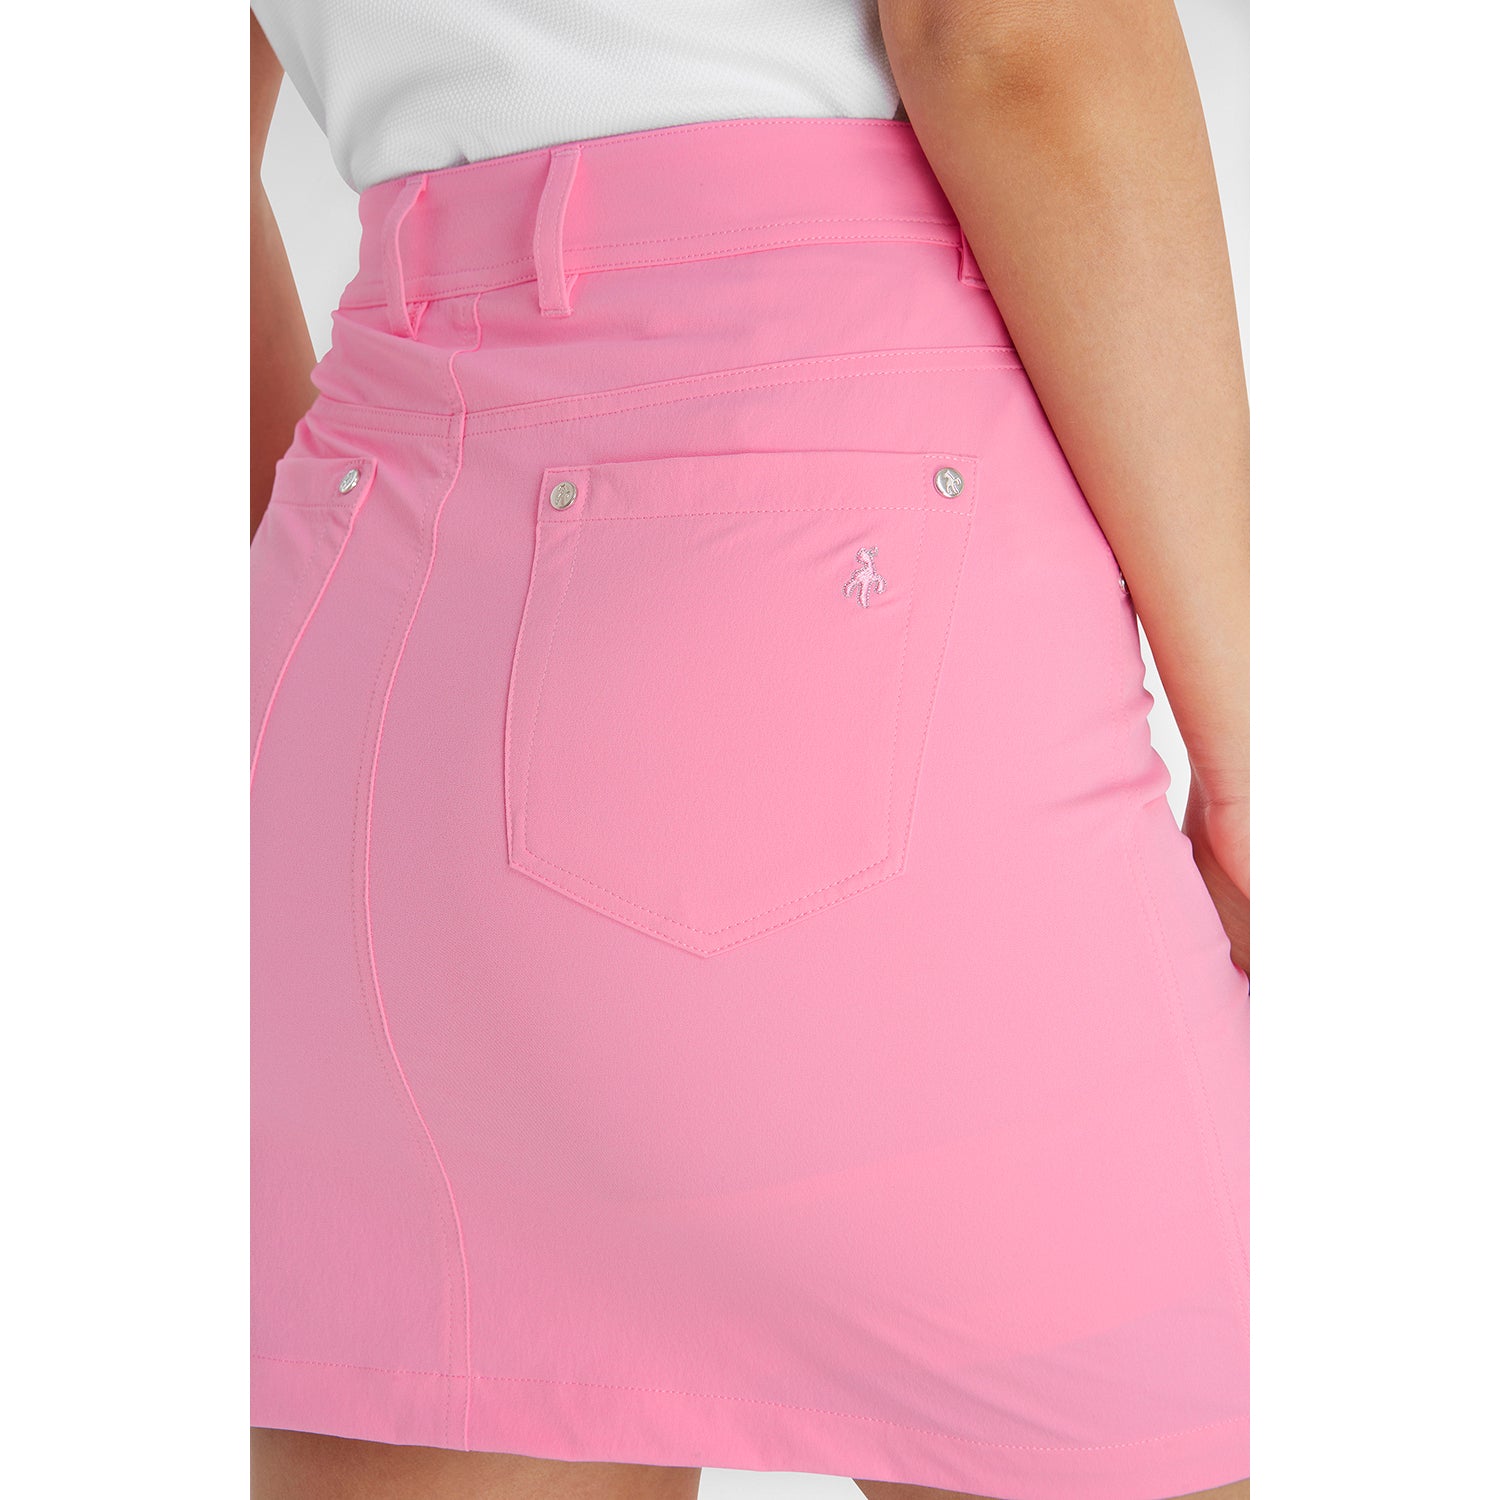 Green Lamb Ladies Stretch Skort with UPF30 Protection in Candy